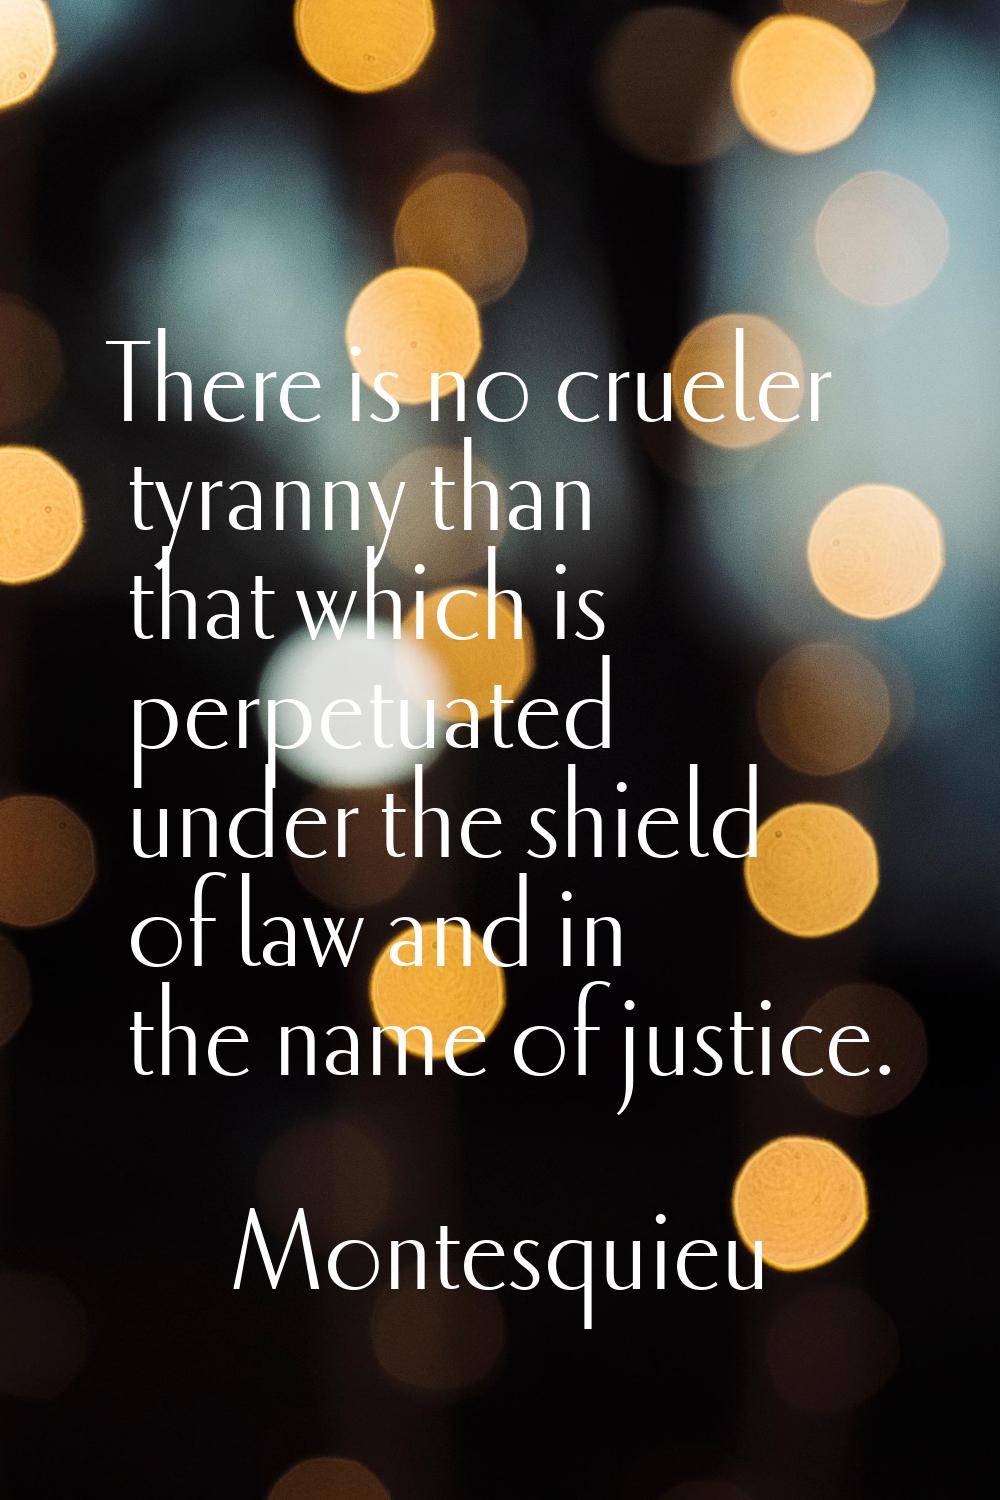 There is no crueler tyranny than that which is perpetuated under the shield of law and in the name 